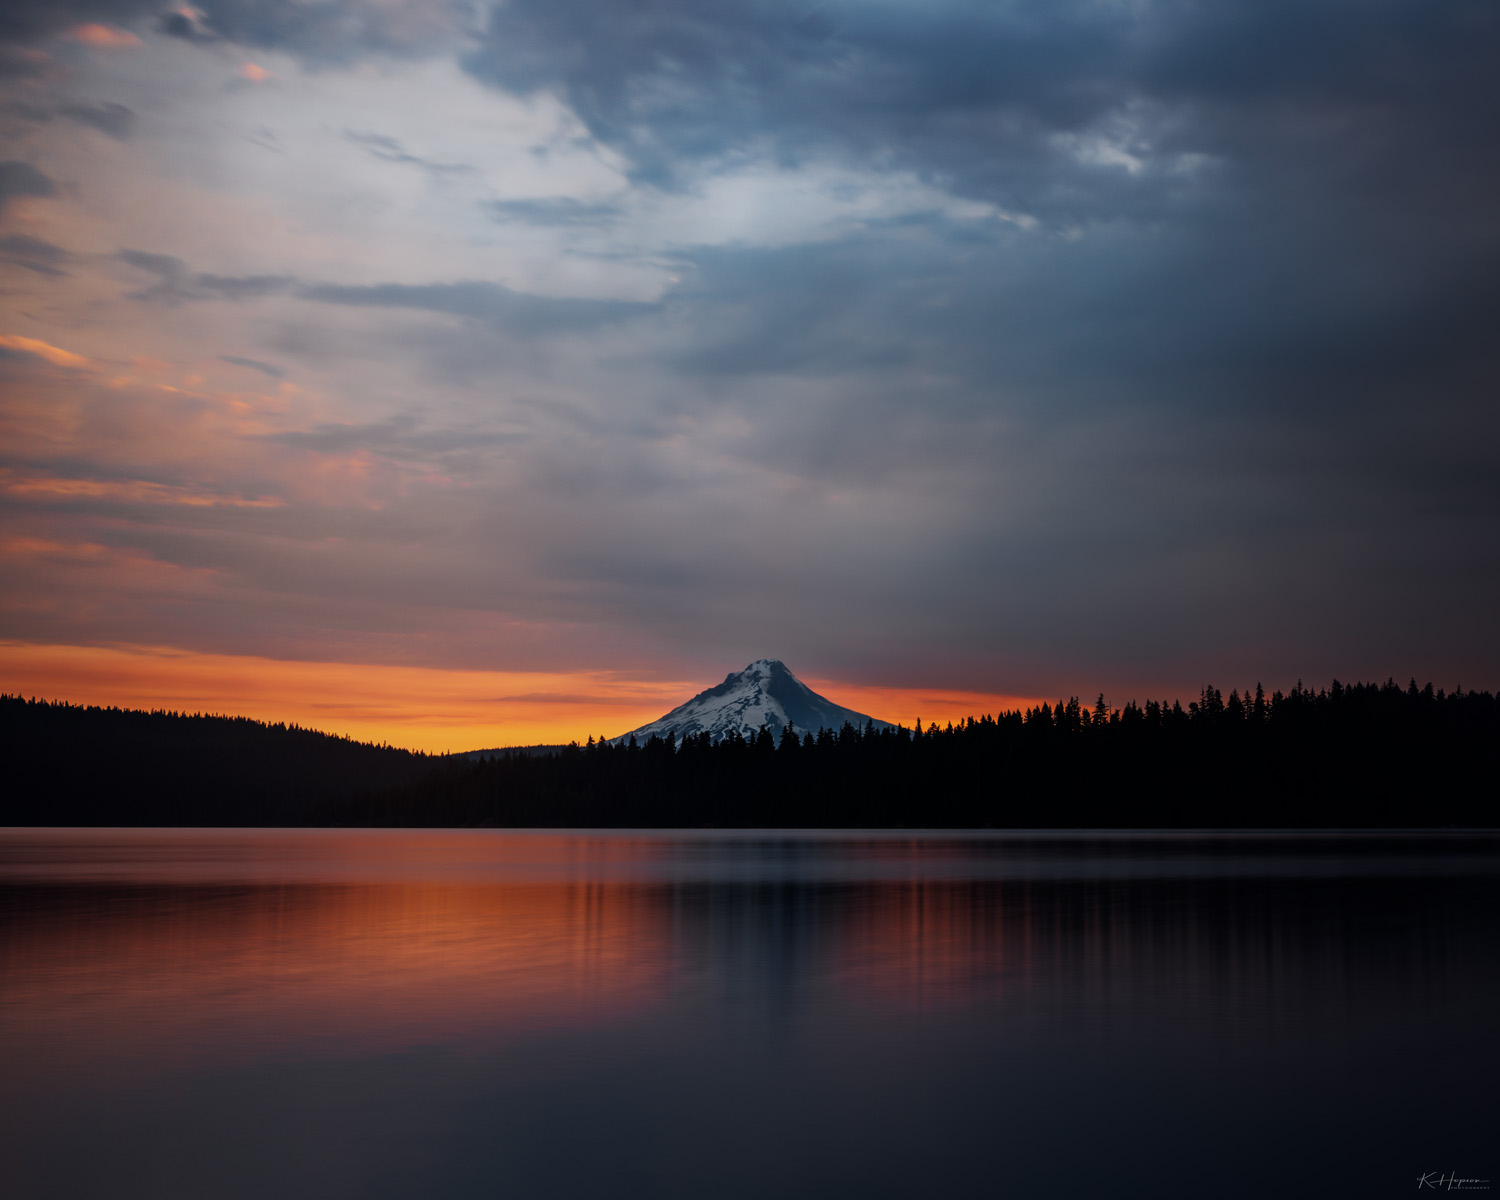 sunrise on timothy lake, mt. hood national forest. fiery glow from behind the mountain and reflecting on the water and dark forest in front of the mountain.